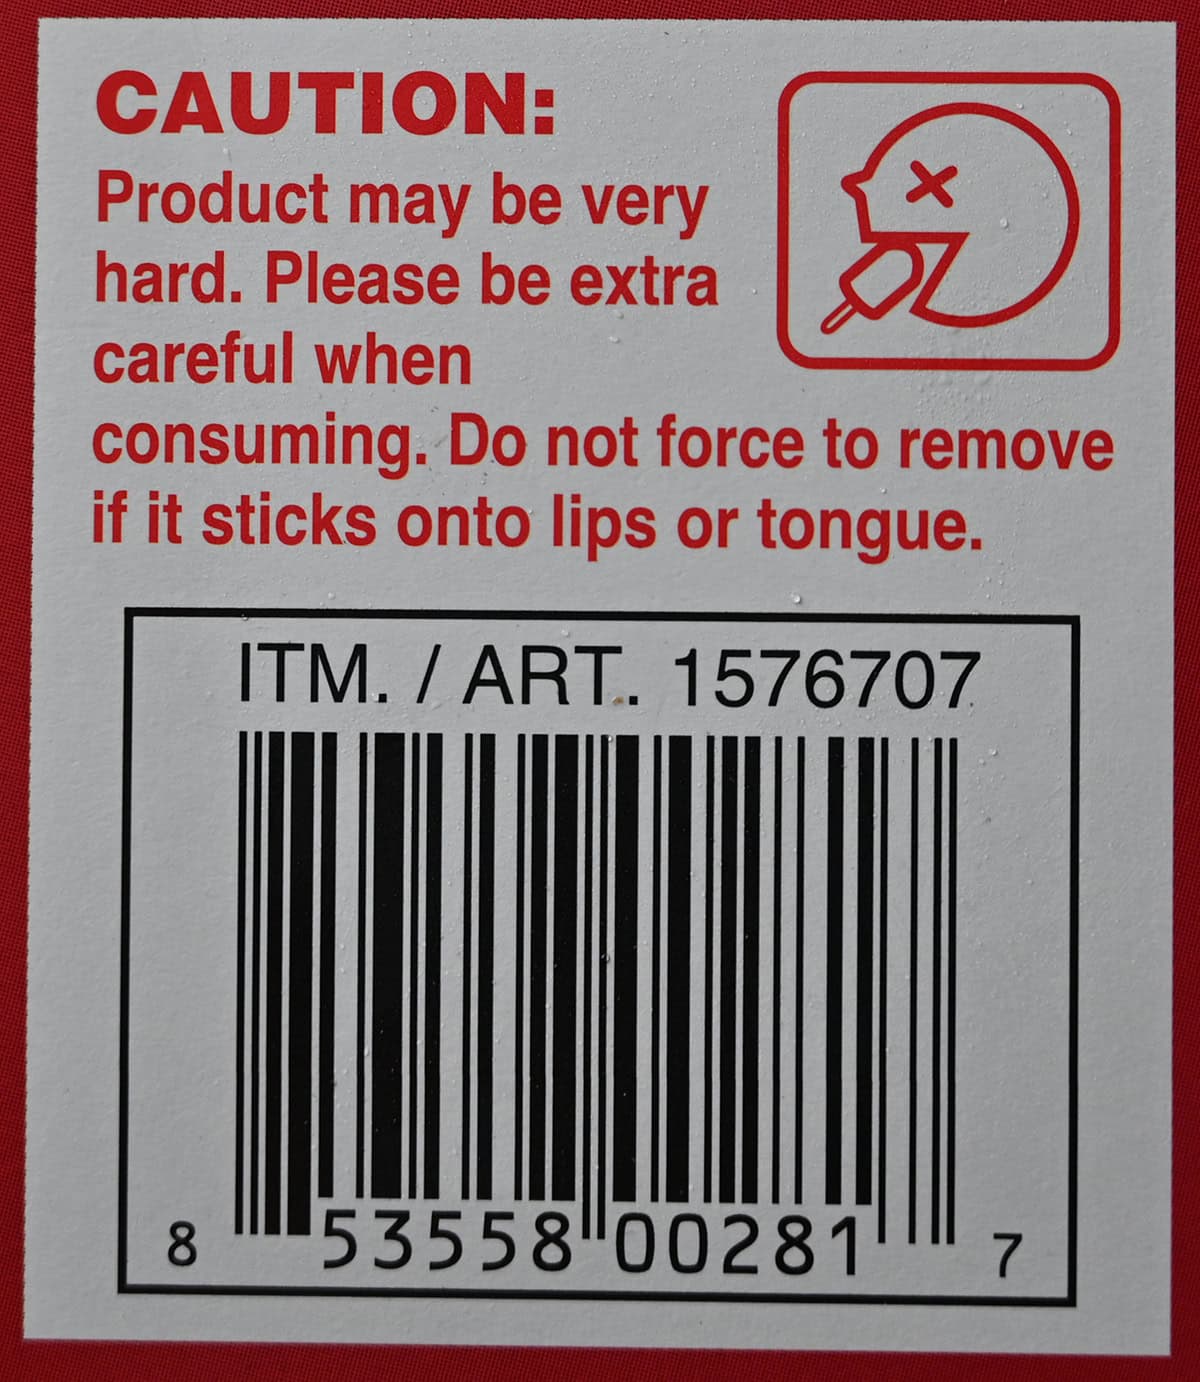 Image of a warning on the box of frozen dessert bars saying not to forcefully remove lips or tongue if it sticks to the bar. 